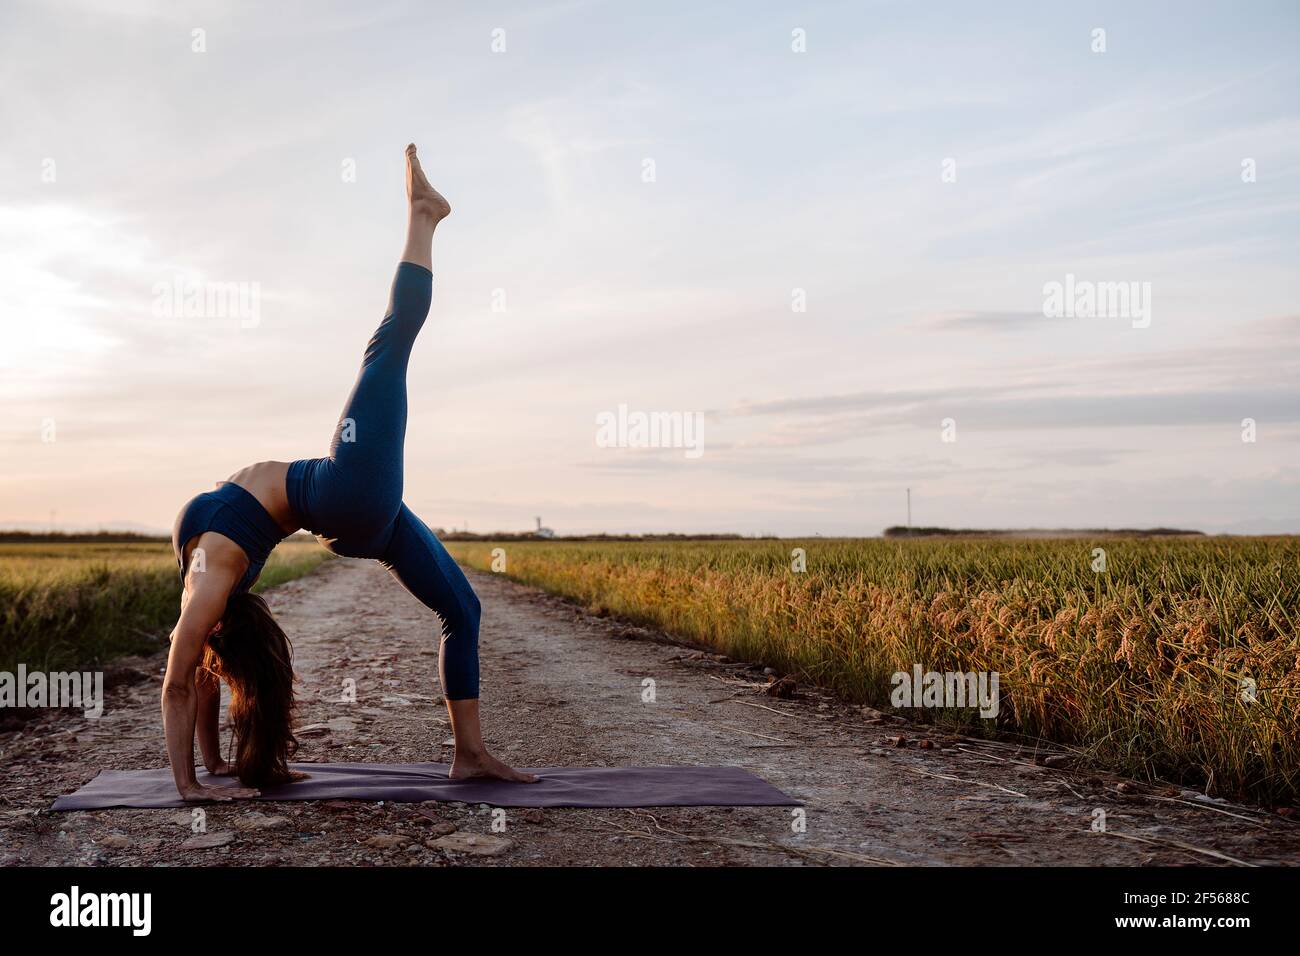 Woman doing back bend with one leg raised against sky Stock Photo